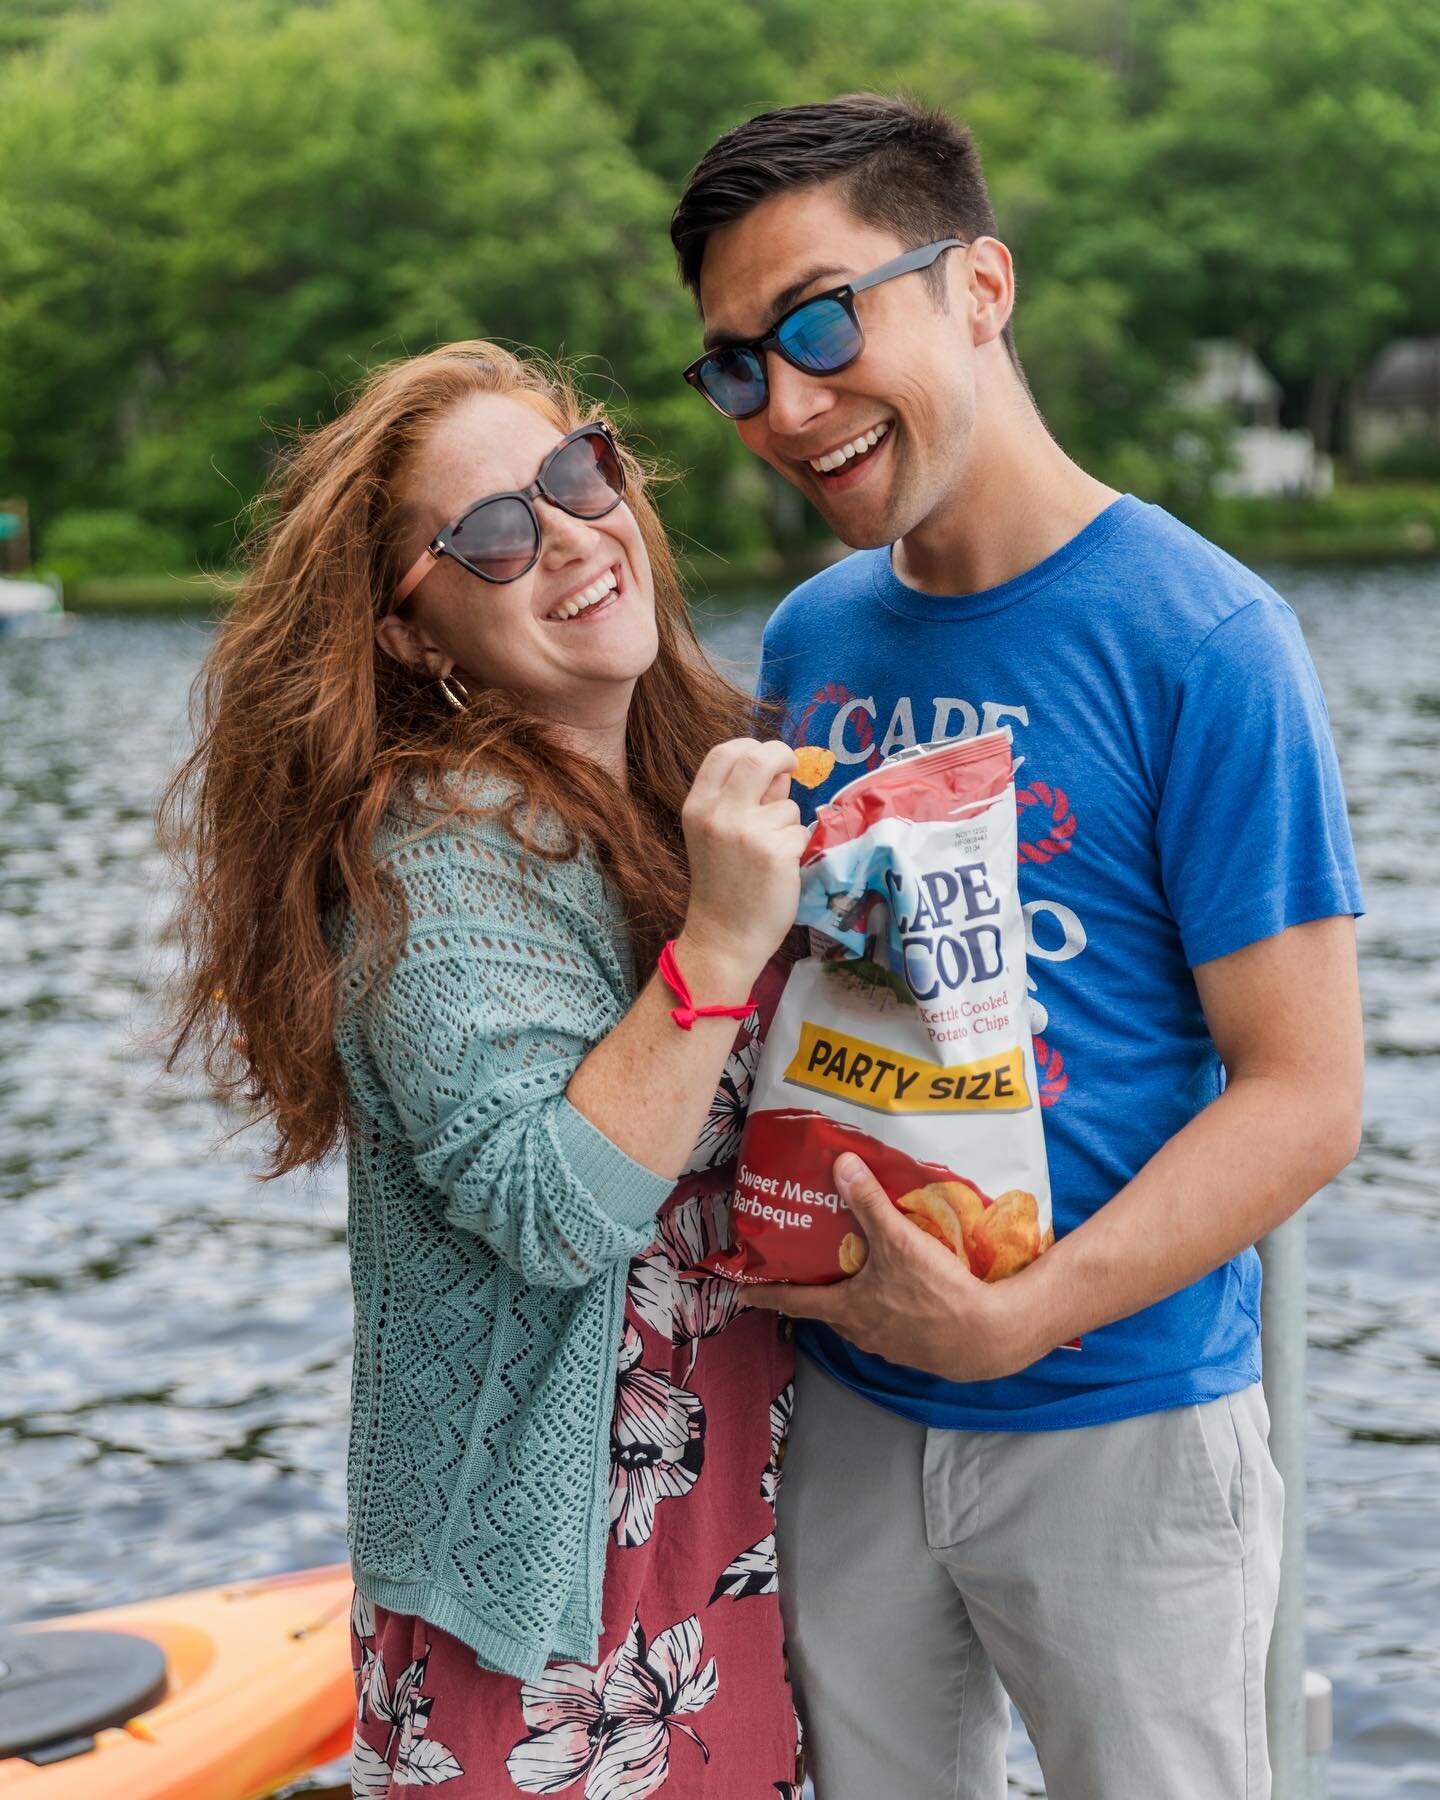 New England. 
The Lake. 
Cape Cod Chips!
 
Summer is in full force! 
 
 
 
 
#lakelife #capecodchips #maine #visitmaine